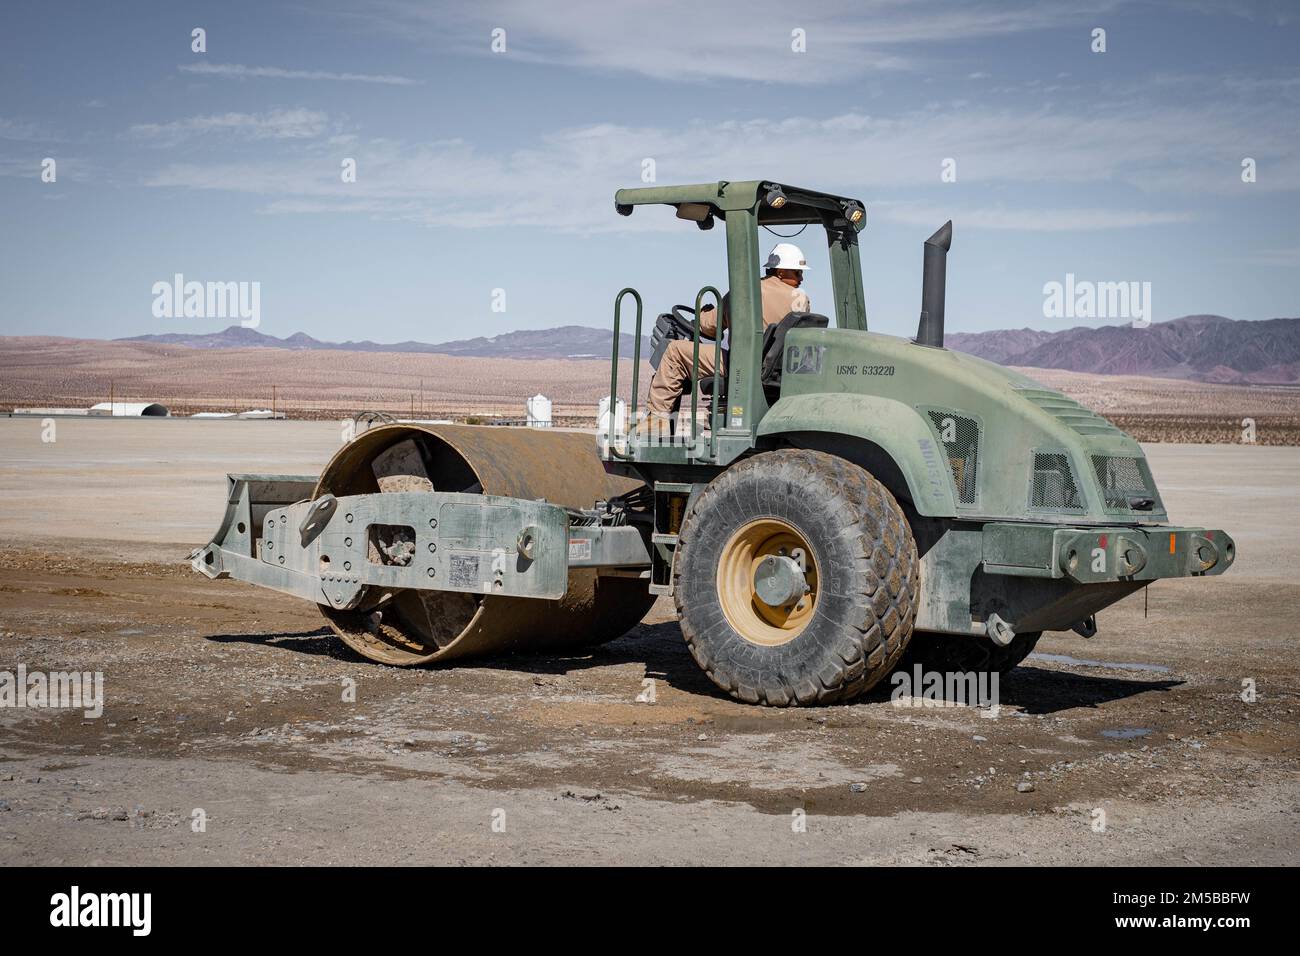 A U.S. Marine with Aviation Ground Support Detachment, Marine Air Ground Task Force Training Command, operates a CS-563D AW Vibratory Single Drum Compactor at the Strategic Expeditionary Landing Field aboard Marine Corps Air Ground Combat Center, Twentynine Palms, California, Feb. 18, 2022. Due to erosion and routine use, periodic maintenance is required on the SELF to ensure the subgrade underneath the AM-2 aluminum matting remains within safety criteria. Stock Photo